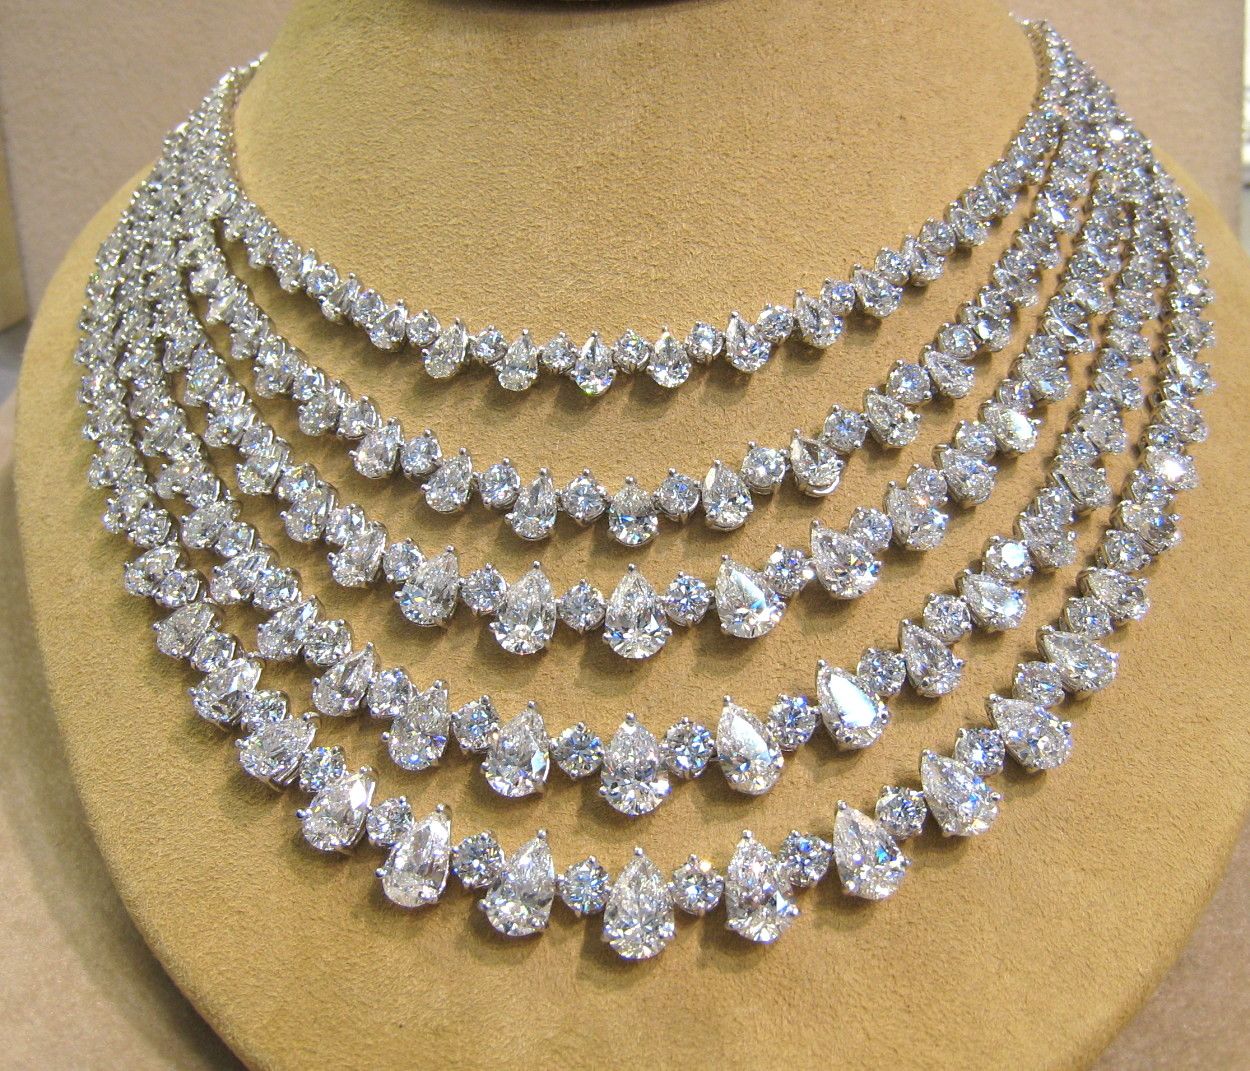 What is new arrive in lab grown diamond necklaces?